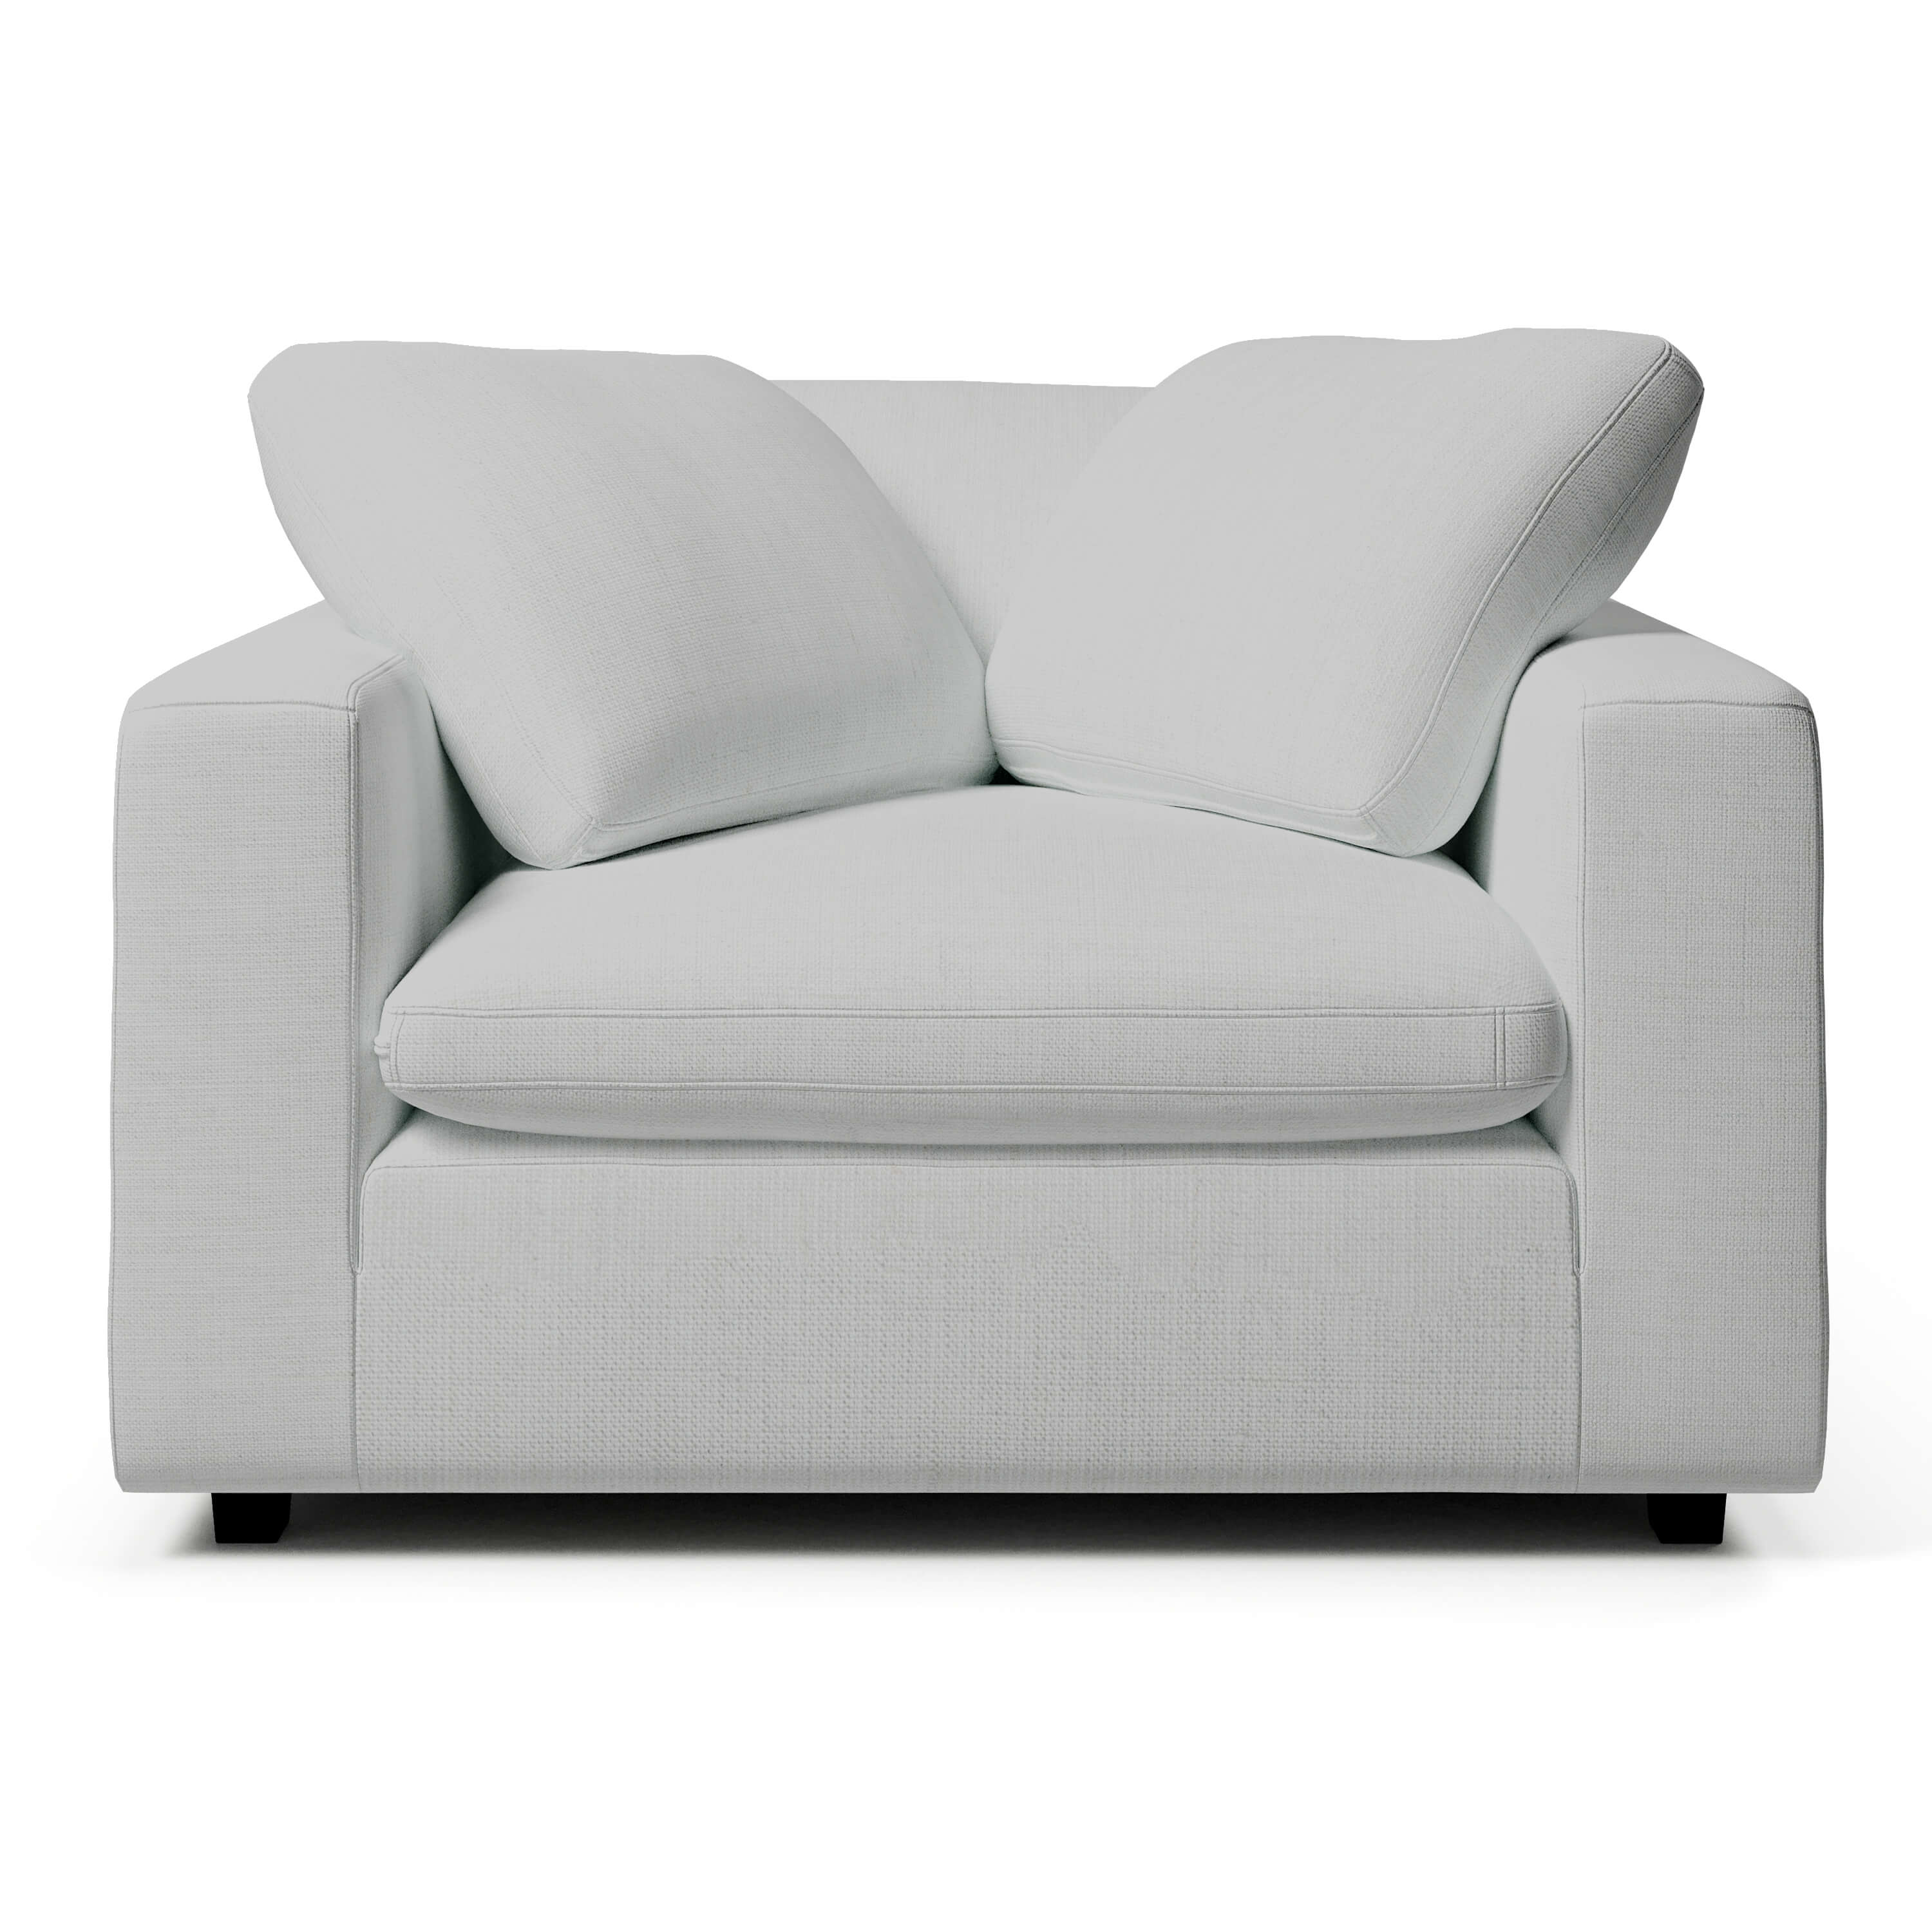 Comfy Lounge Chair | White Comfy Armchair | Couch Haus 